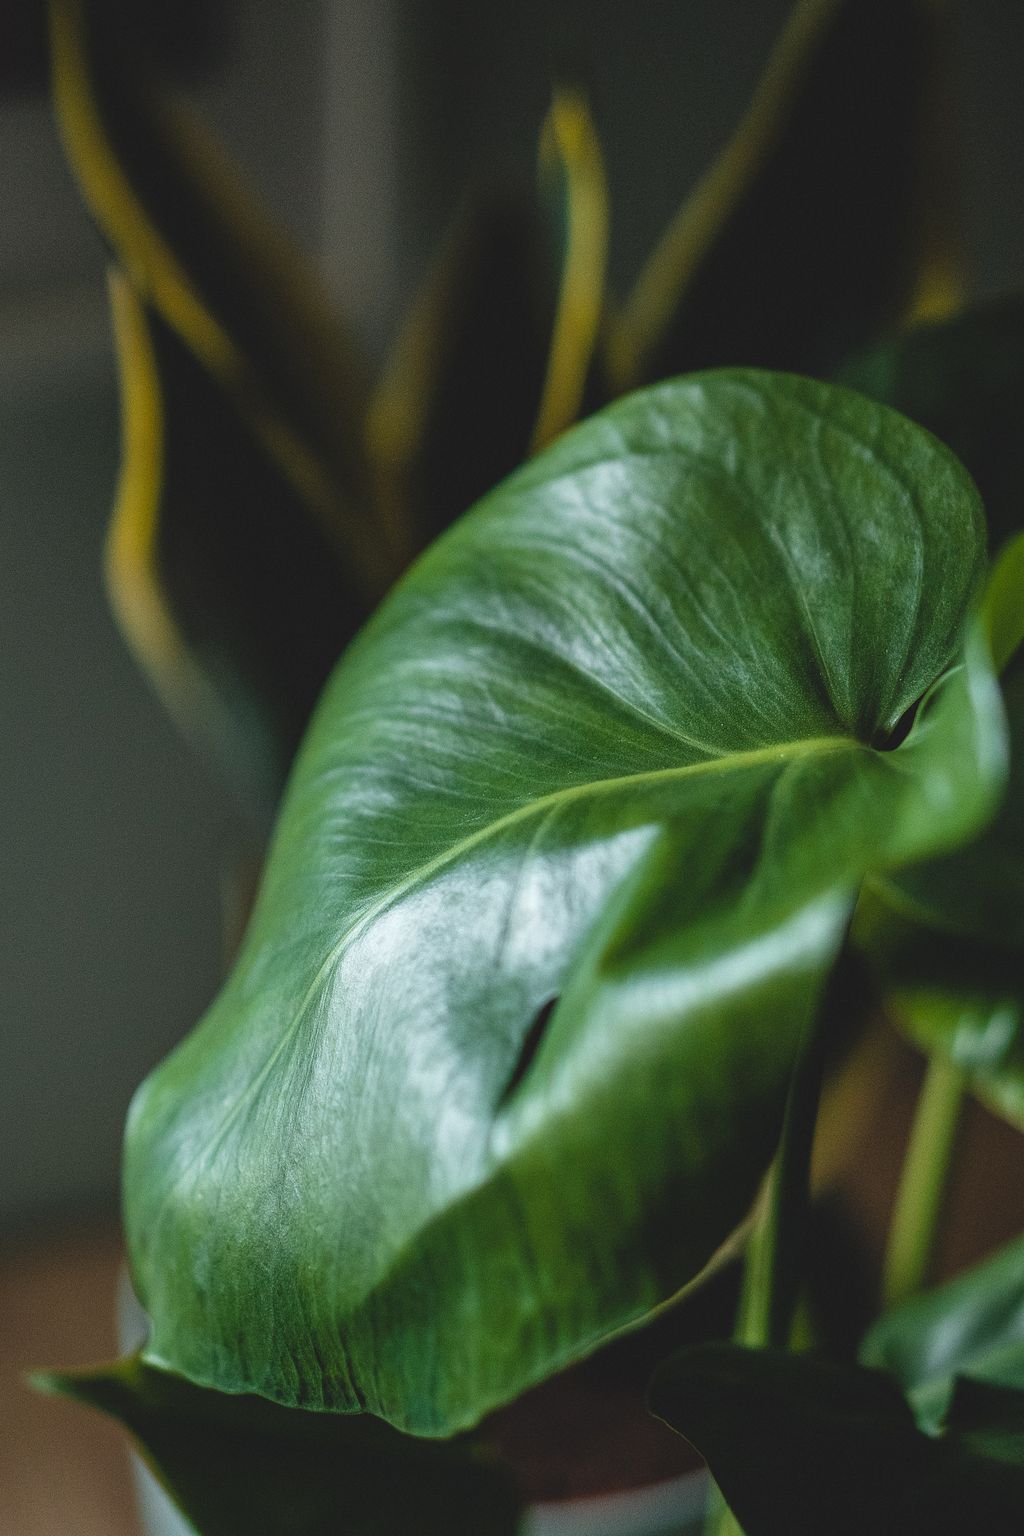 Philodendron (Photo by Maahid Photos from Pexels)